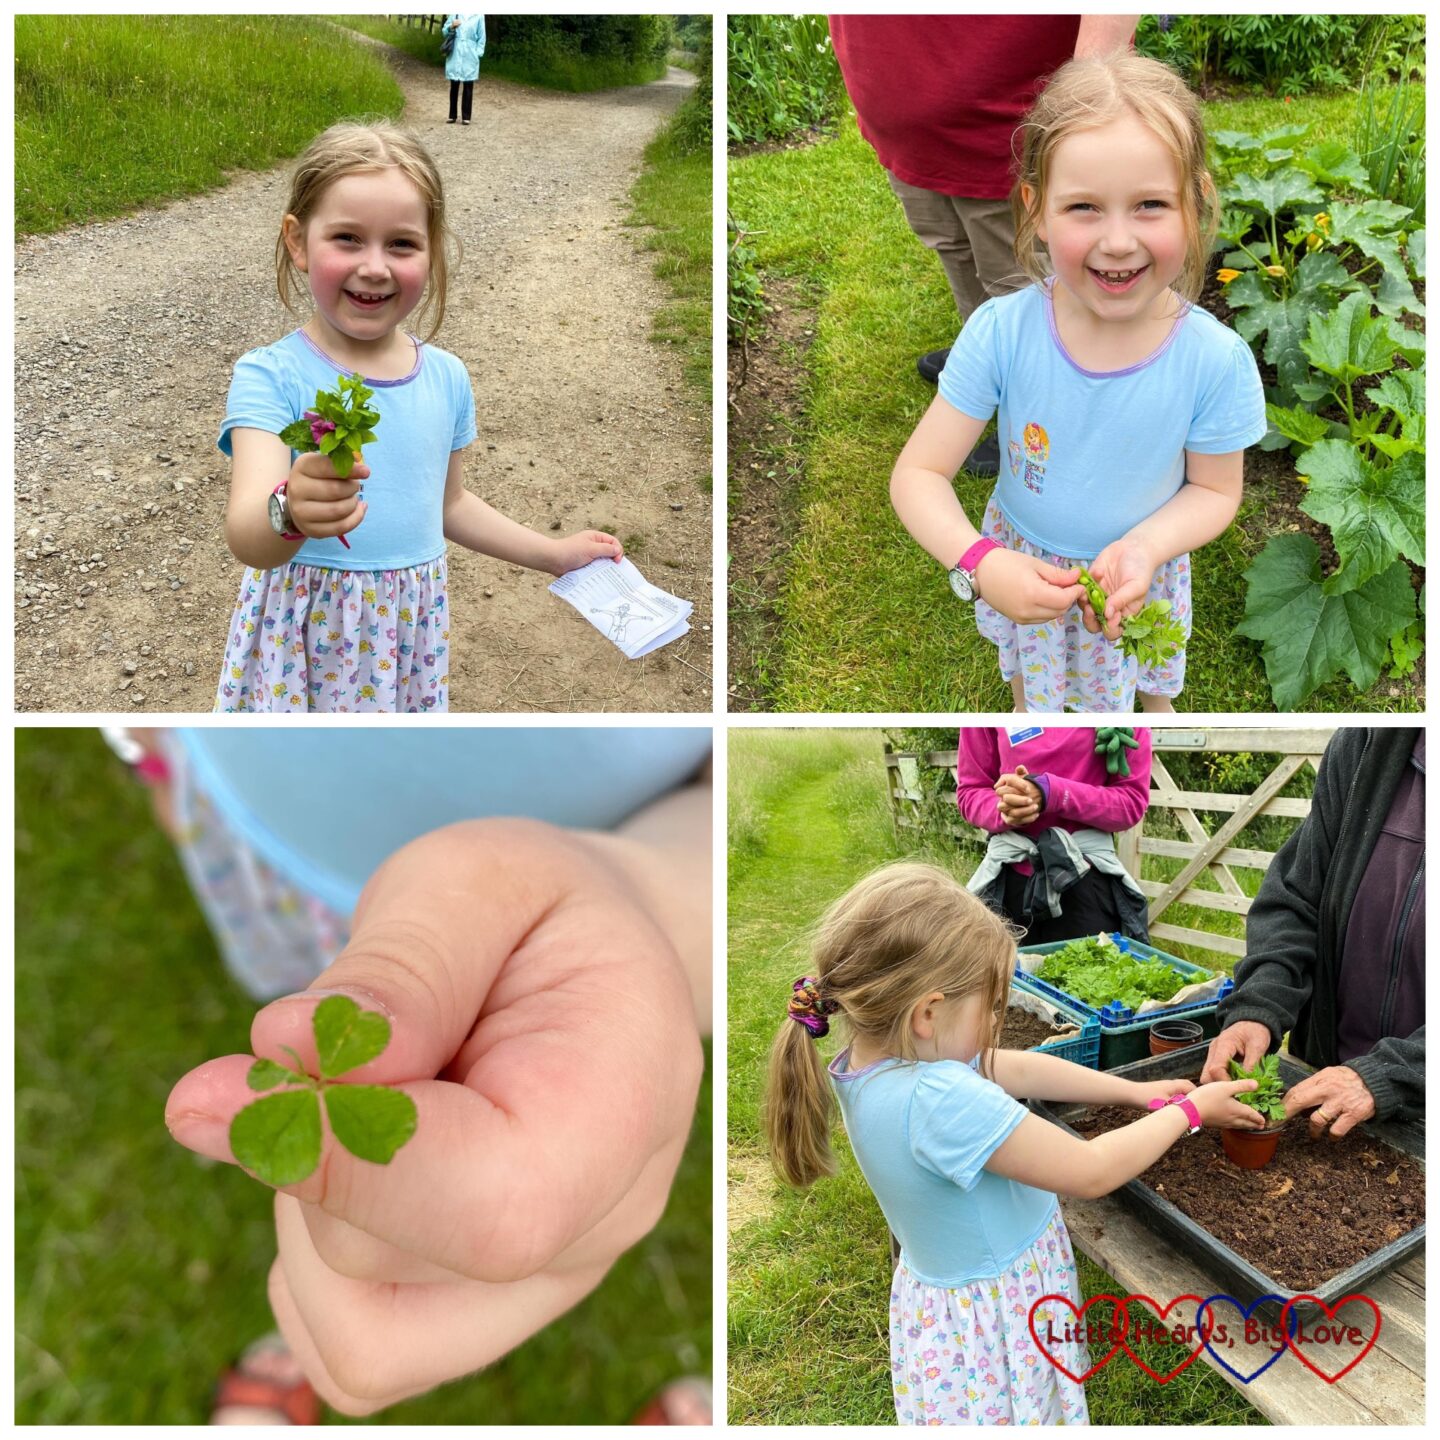 Sophie holding the nosegay she made; Sophie eating peas from the pod; Sophie holding a four-leaf clover; Sophie potting up some feverfew